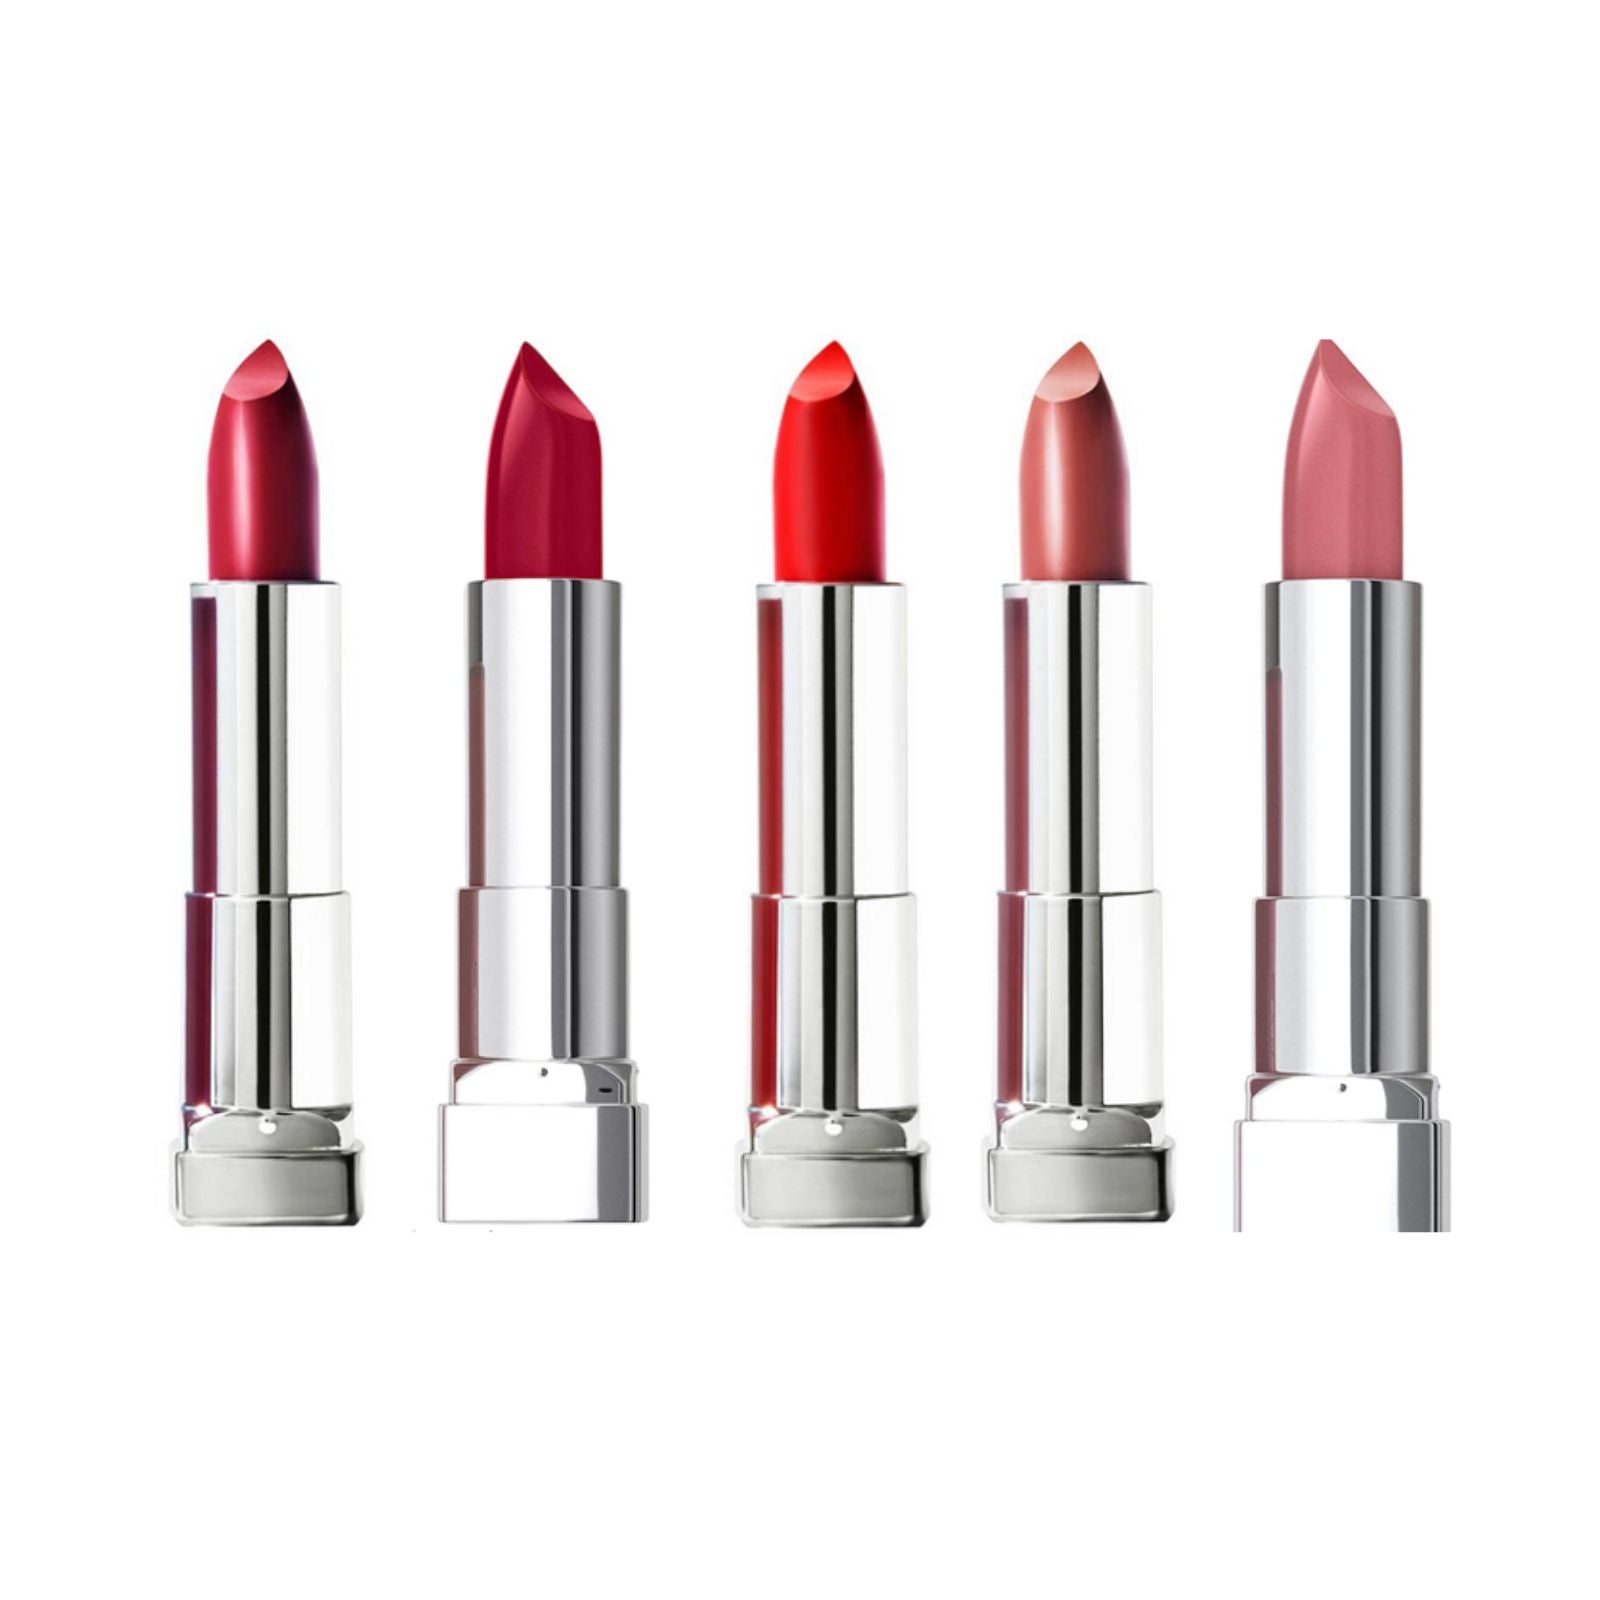 Maybelline Lipstick: Striking Makeup – Anytime Long-lasting Hydrating Color, 